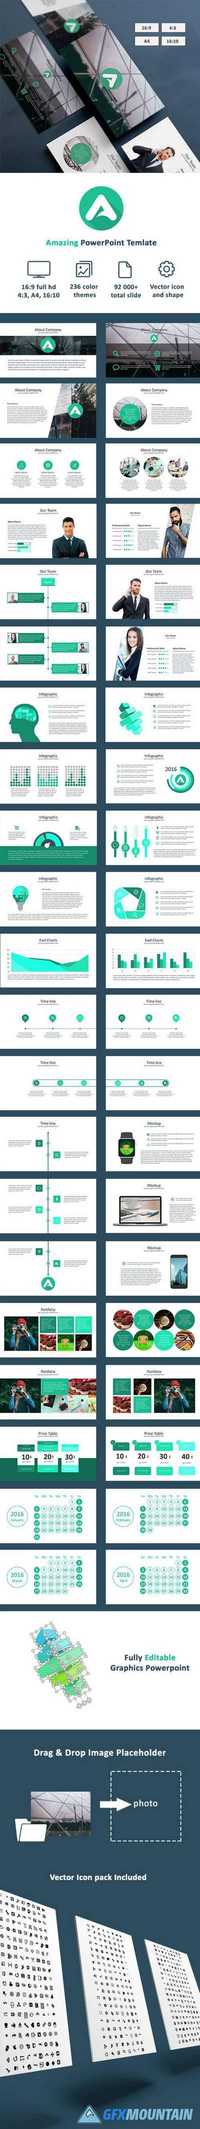 Graphicriver Amazing - Powerpoint Templates 14732478